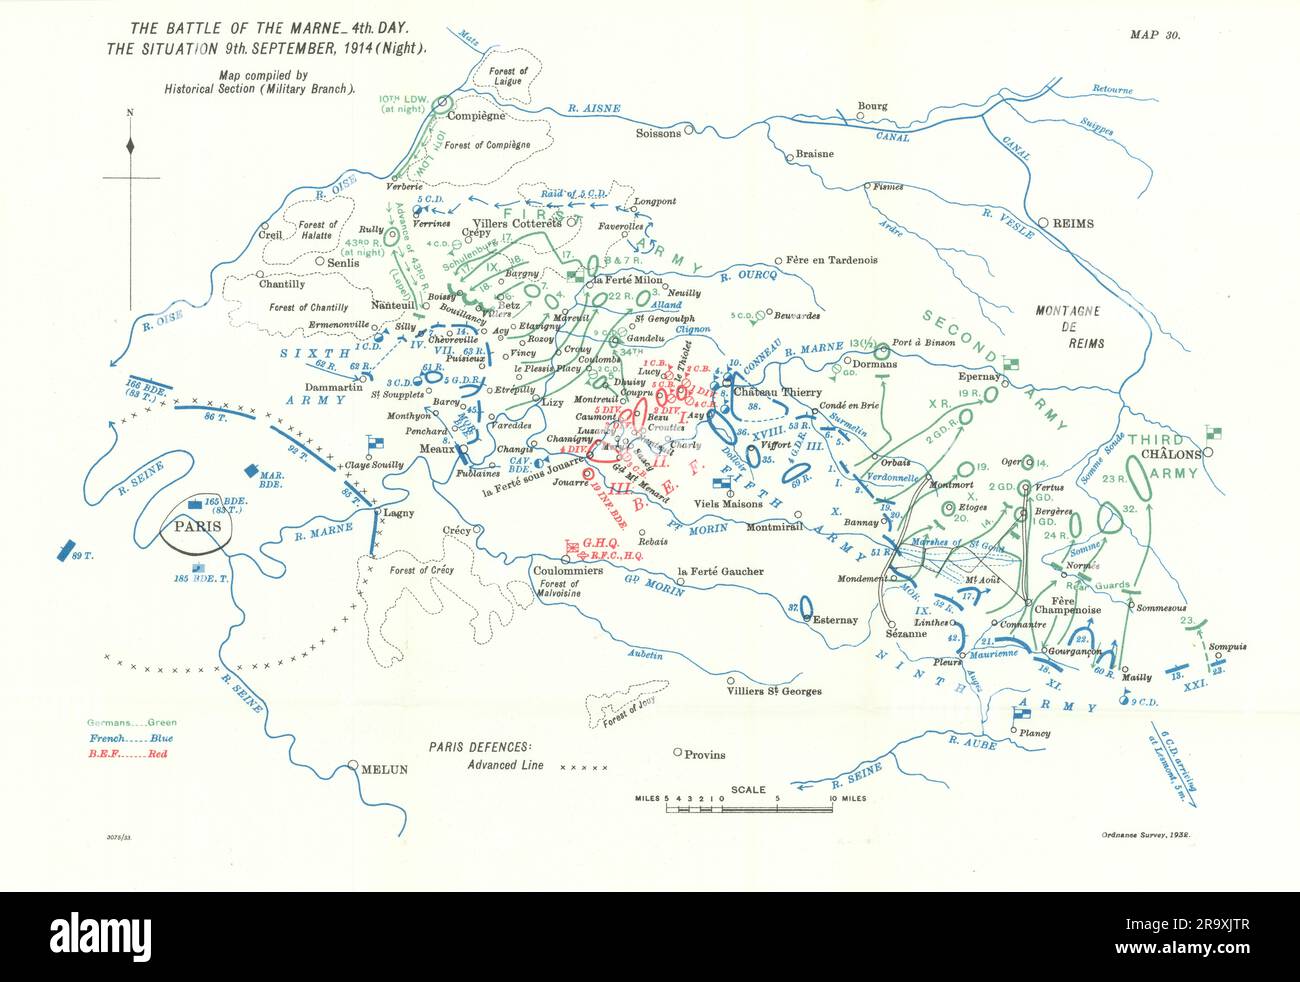 Battle of the Marne. Situation 9th September, 1914 night. WW1. 1933 old map Stock Photo